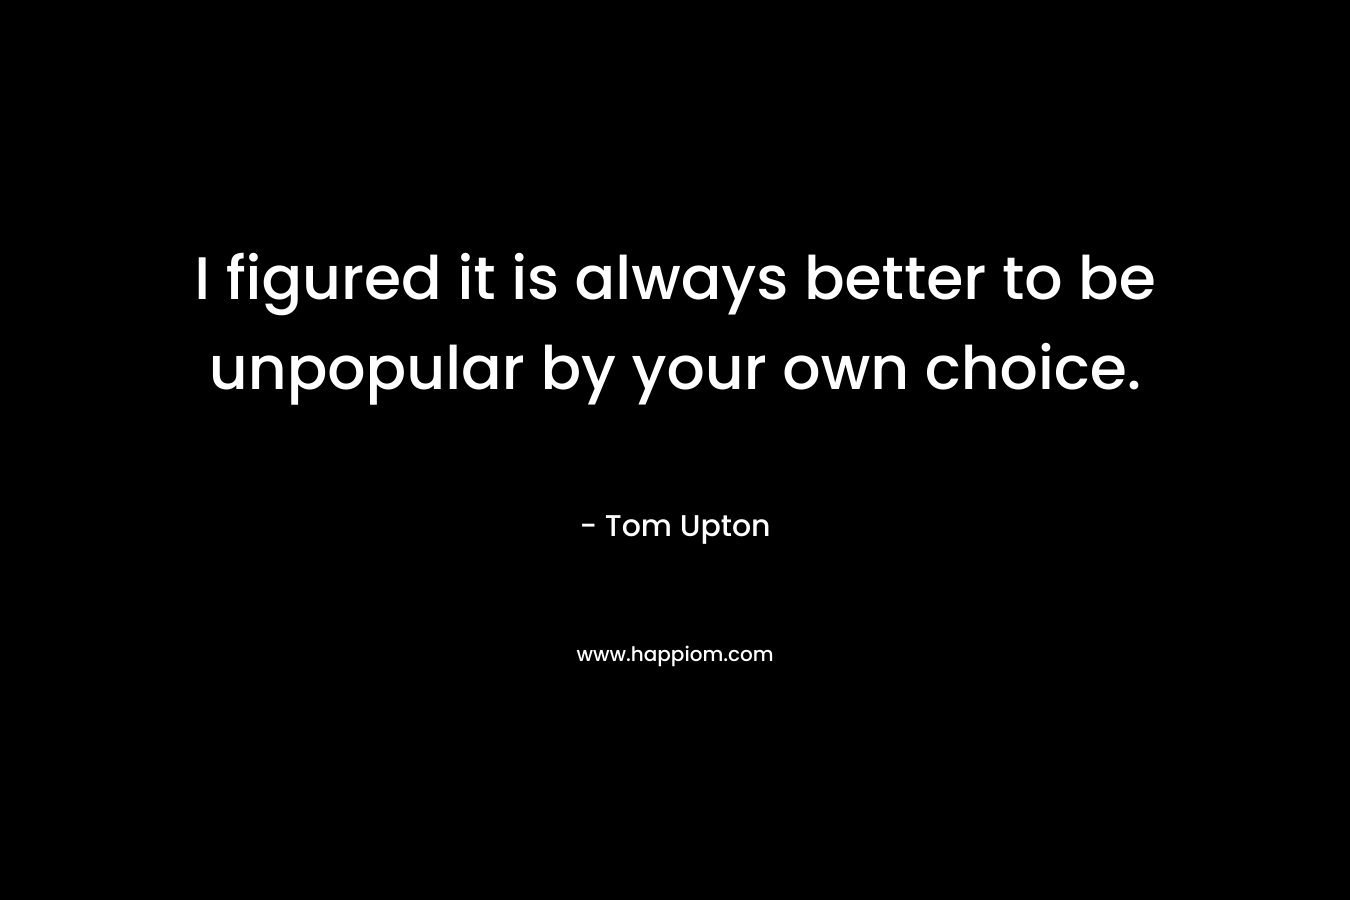 I figured it is always better to be unpopular by your own choice. – Tom Upton